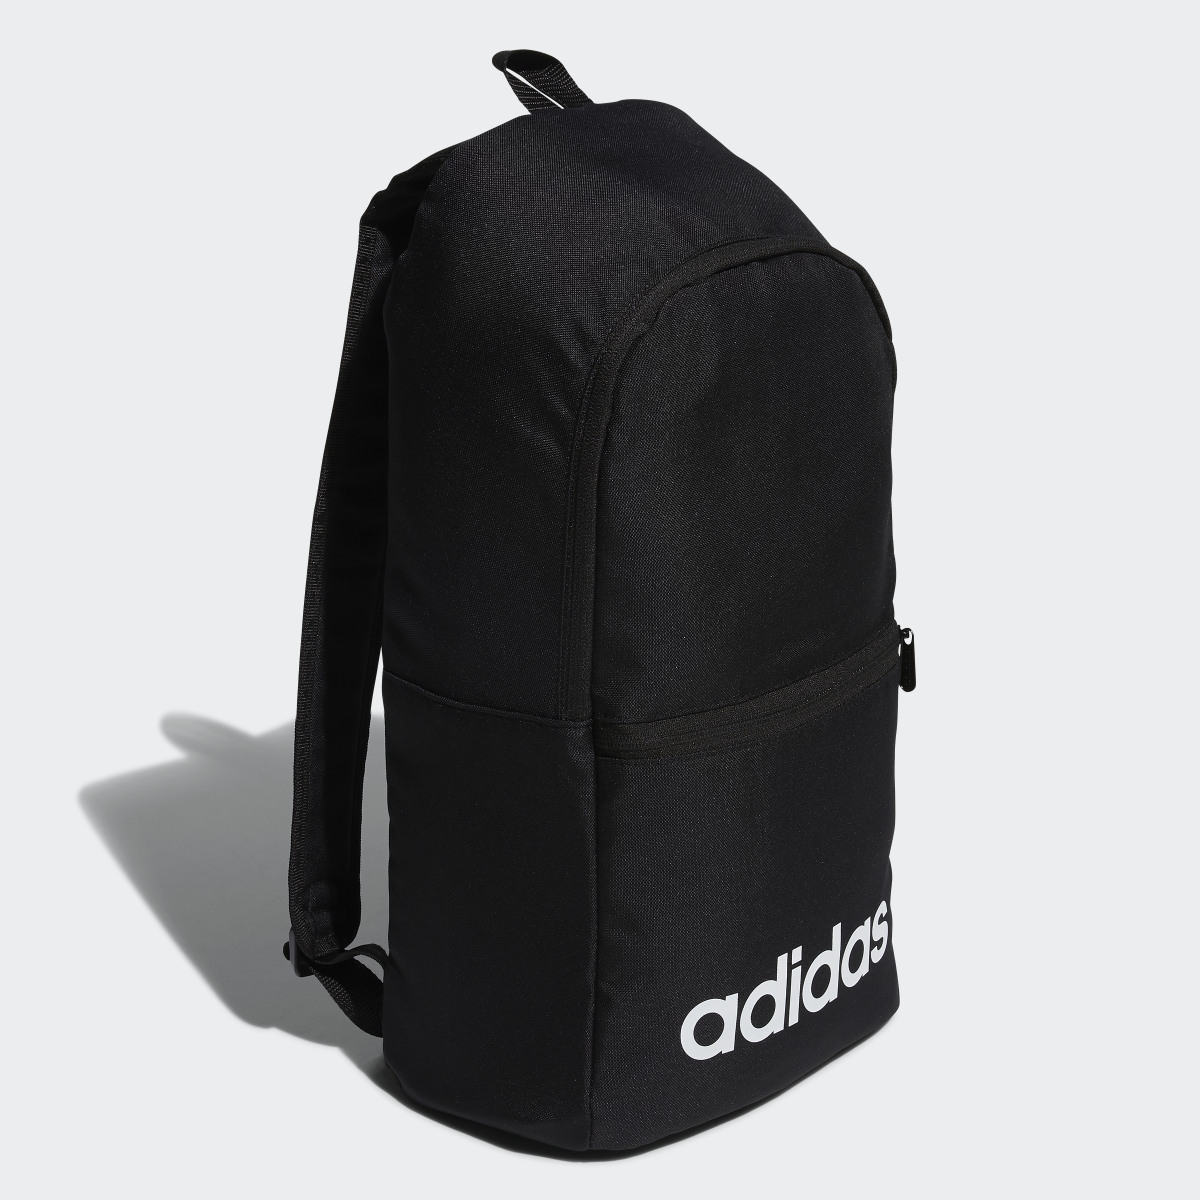 Adidas Linear Classic Daily Rucksack. 4